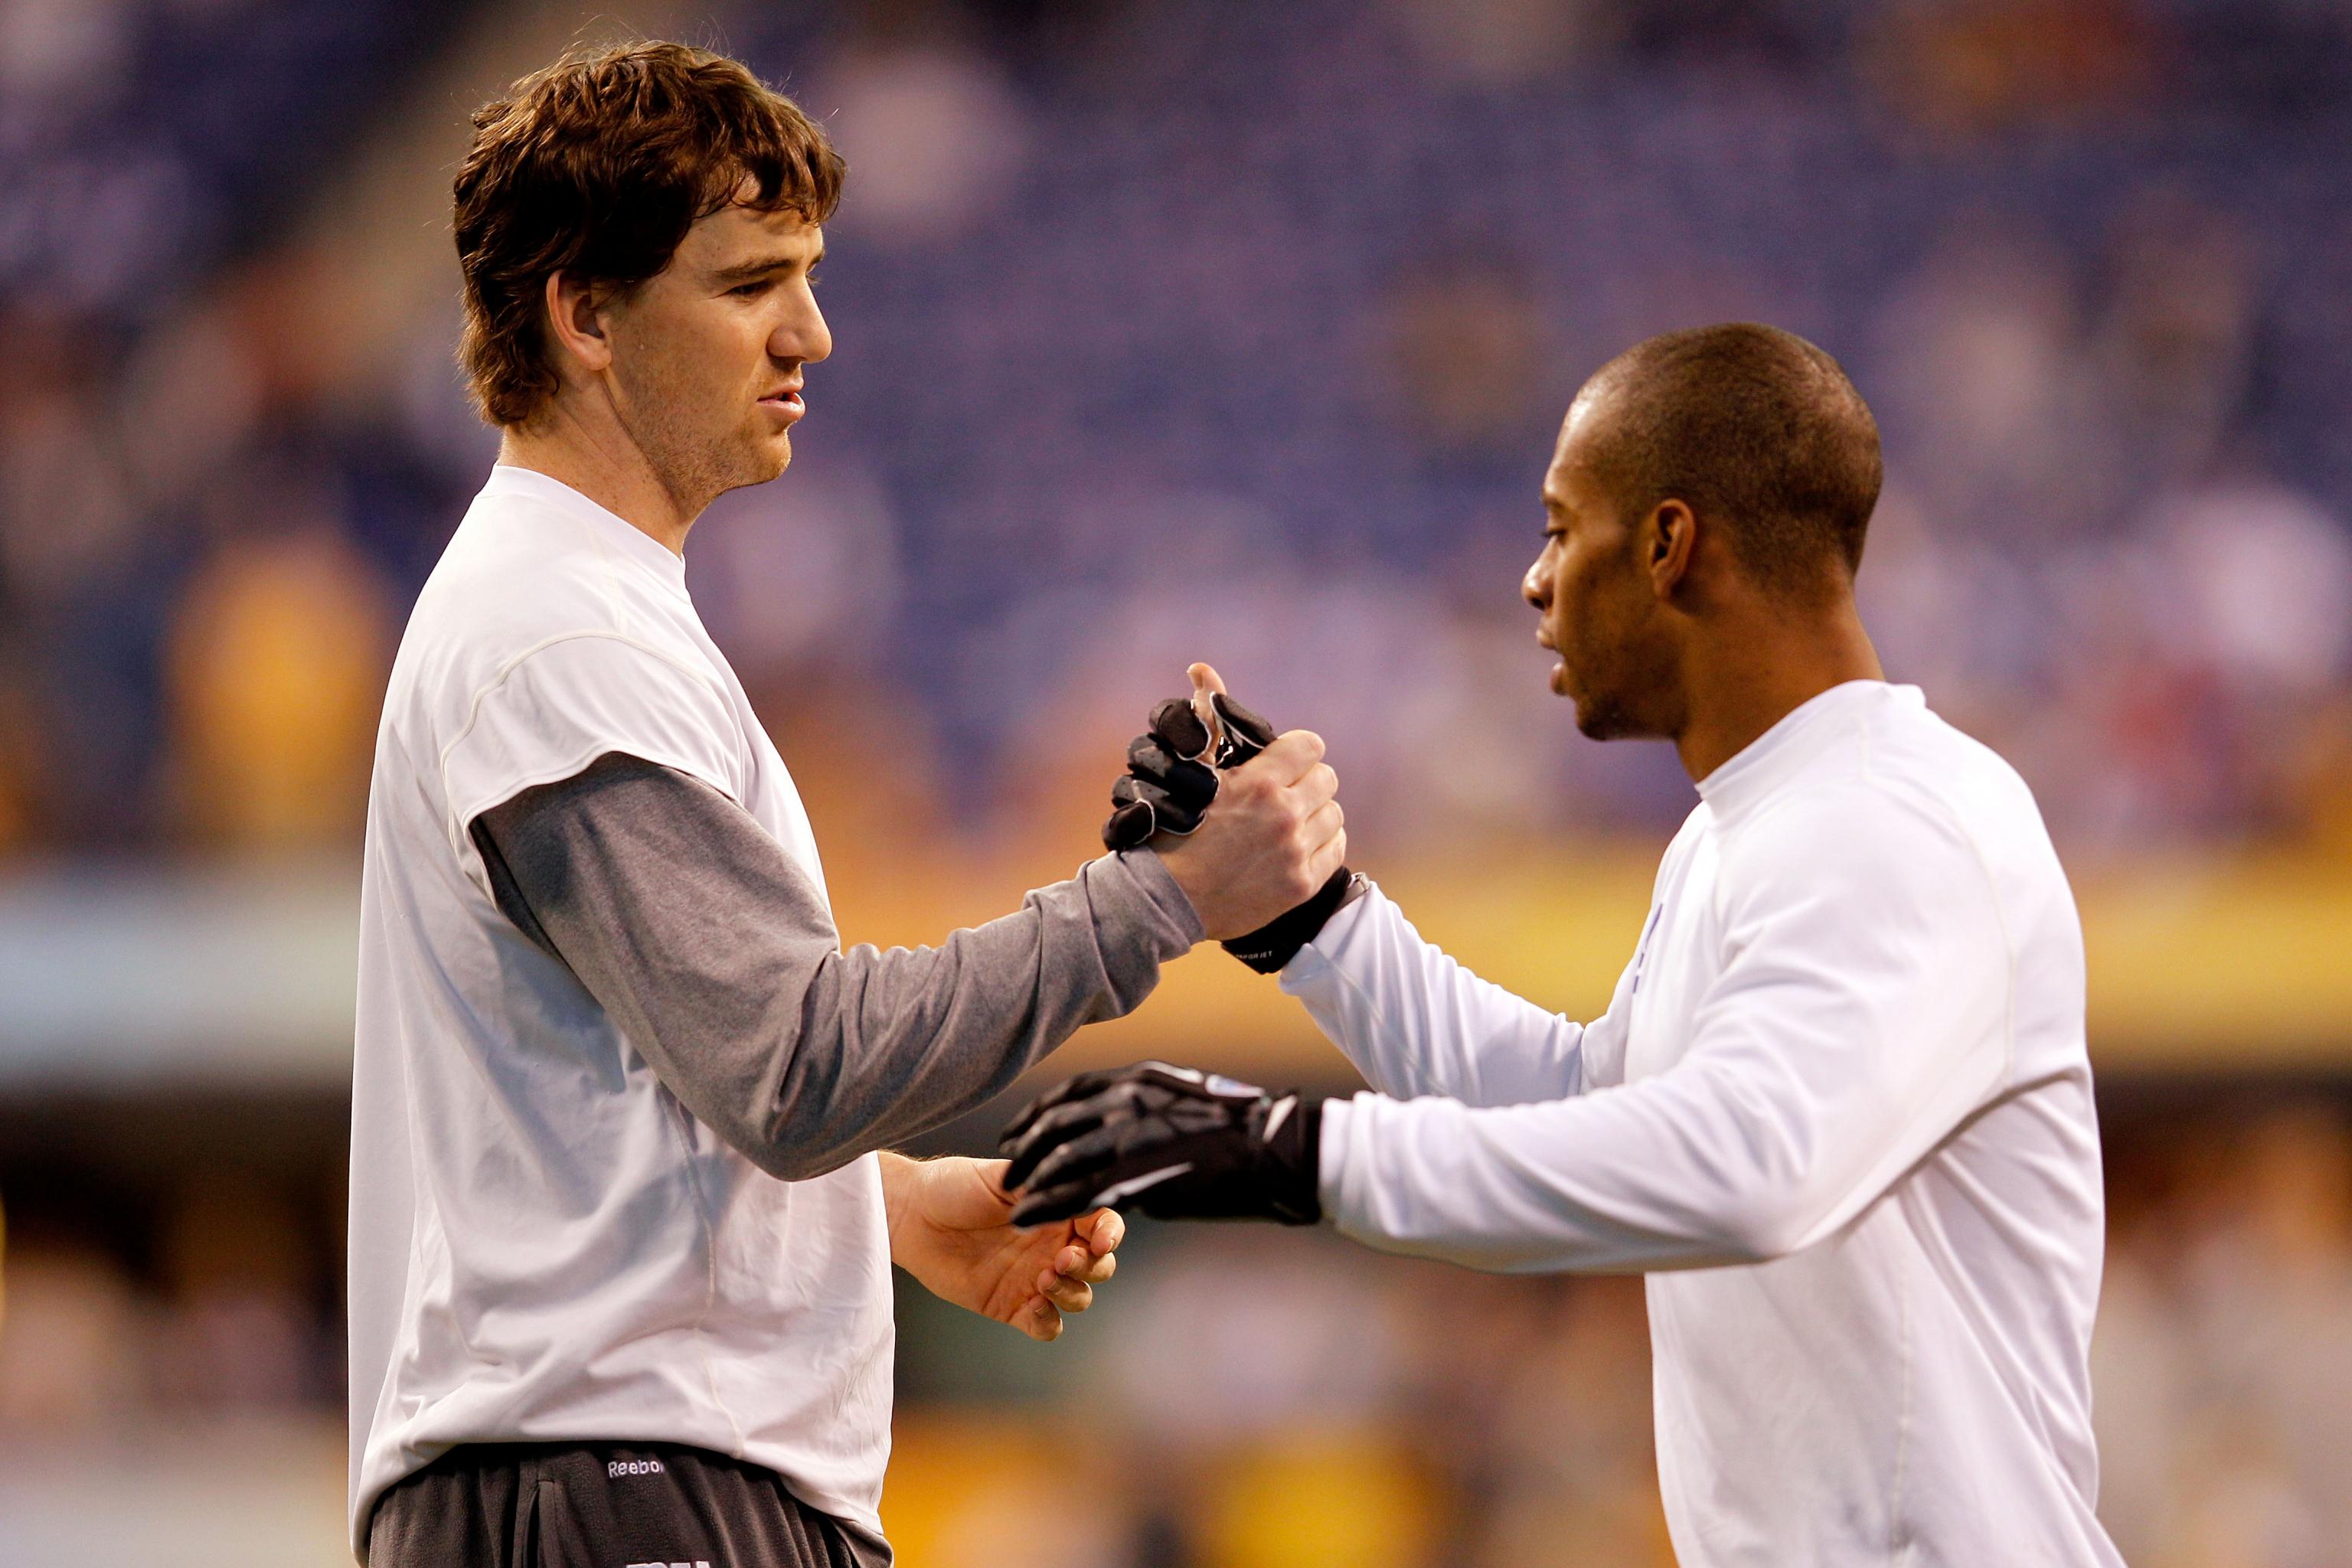 Giants Season Preview 2011: Eli Manning's turnovers, Osi Umenyiora's  contract and more 